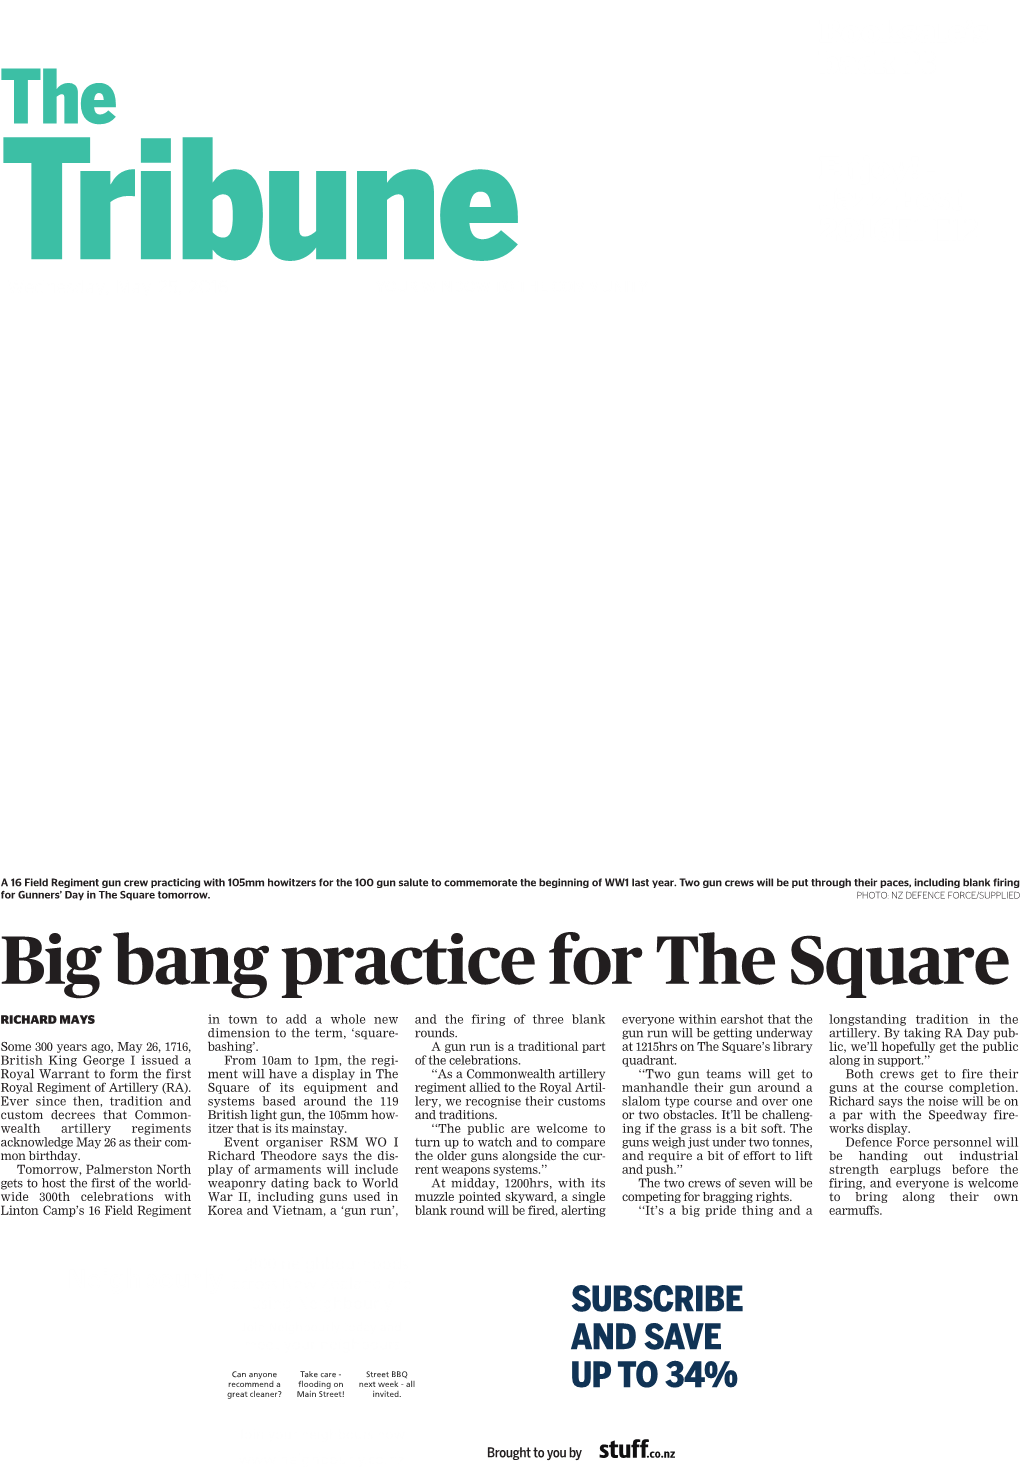 Big Bang Practice for the Square